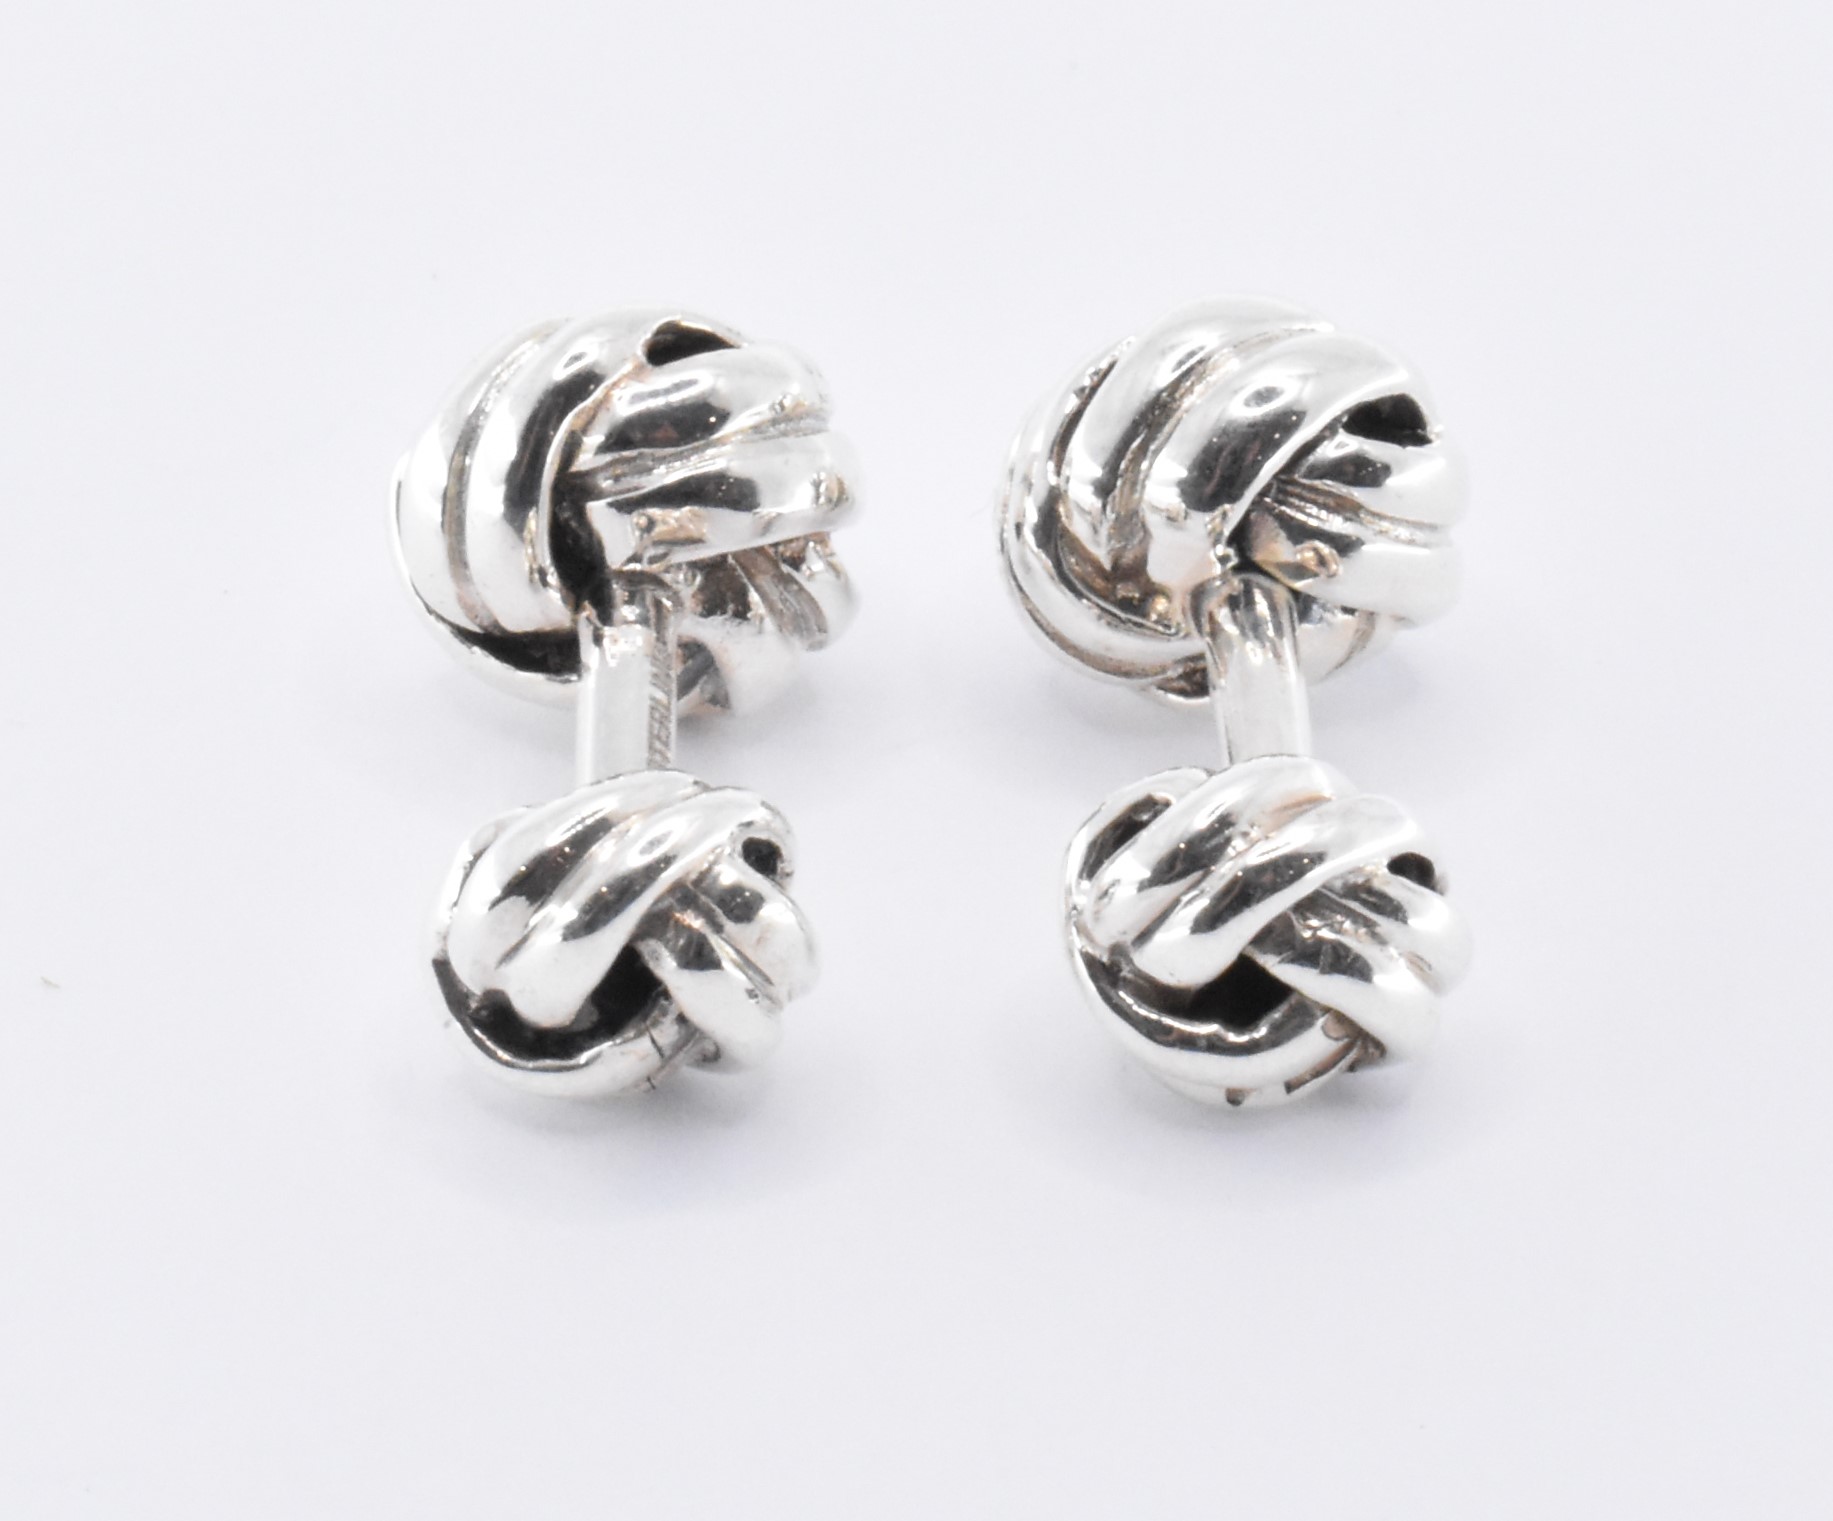 PAIR OF SILVER KNOT CUFFLINKS - Image 4 of 4